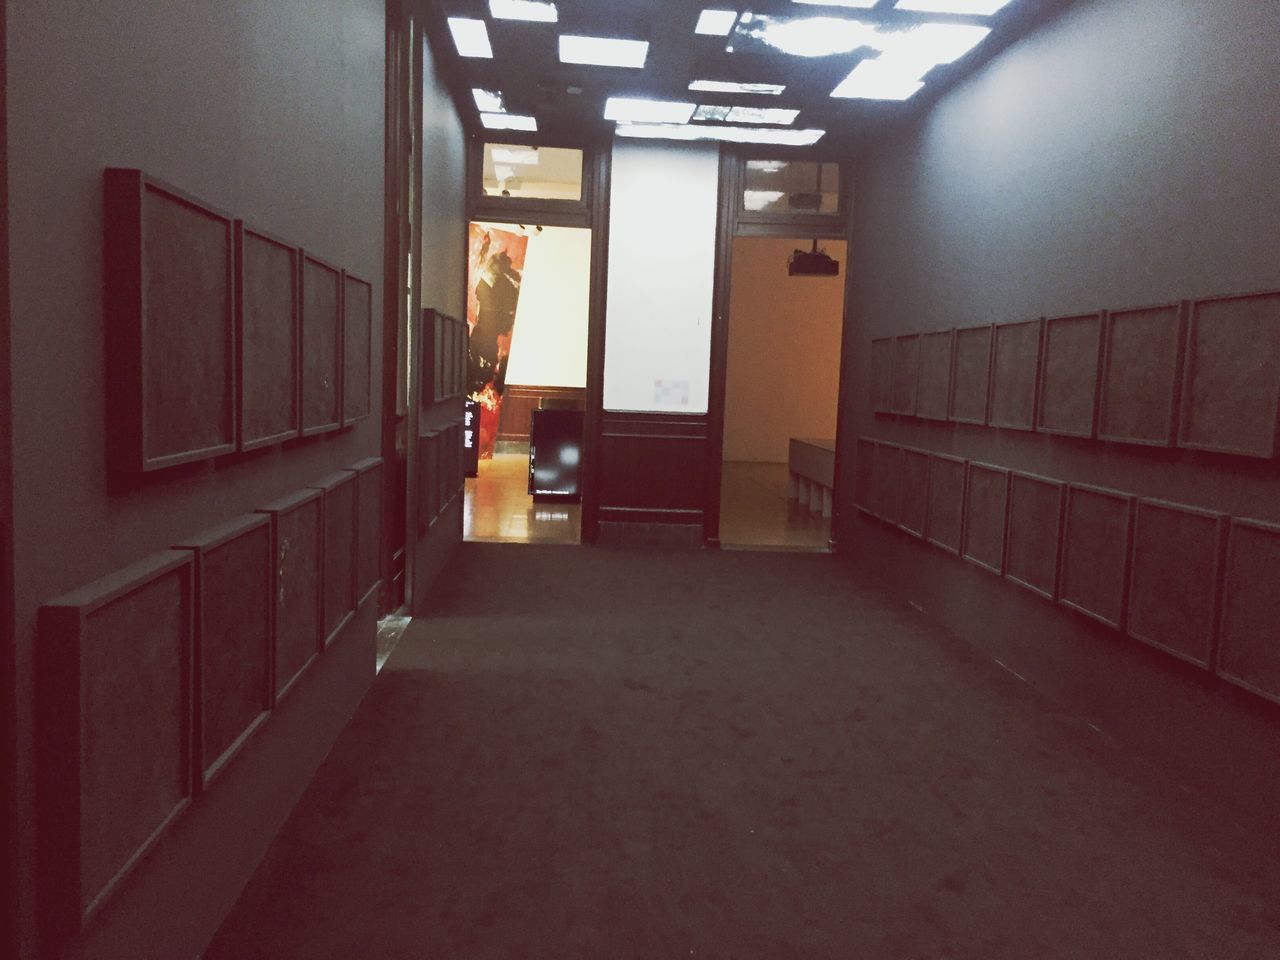 door, entrance, indoors, illuminated, built structure, architecture, no people, exit sign, day